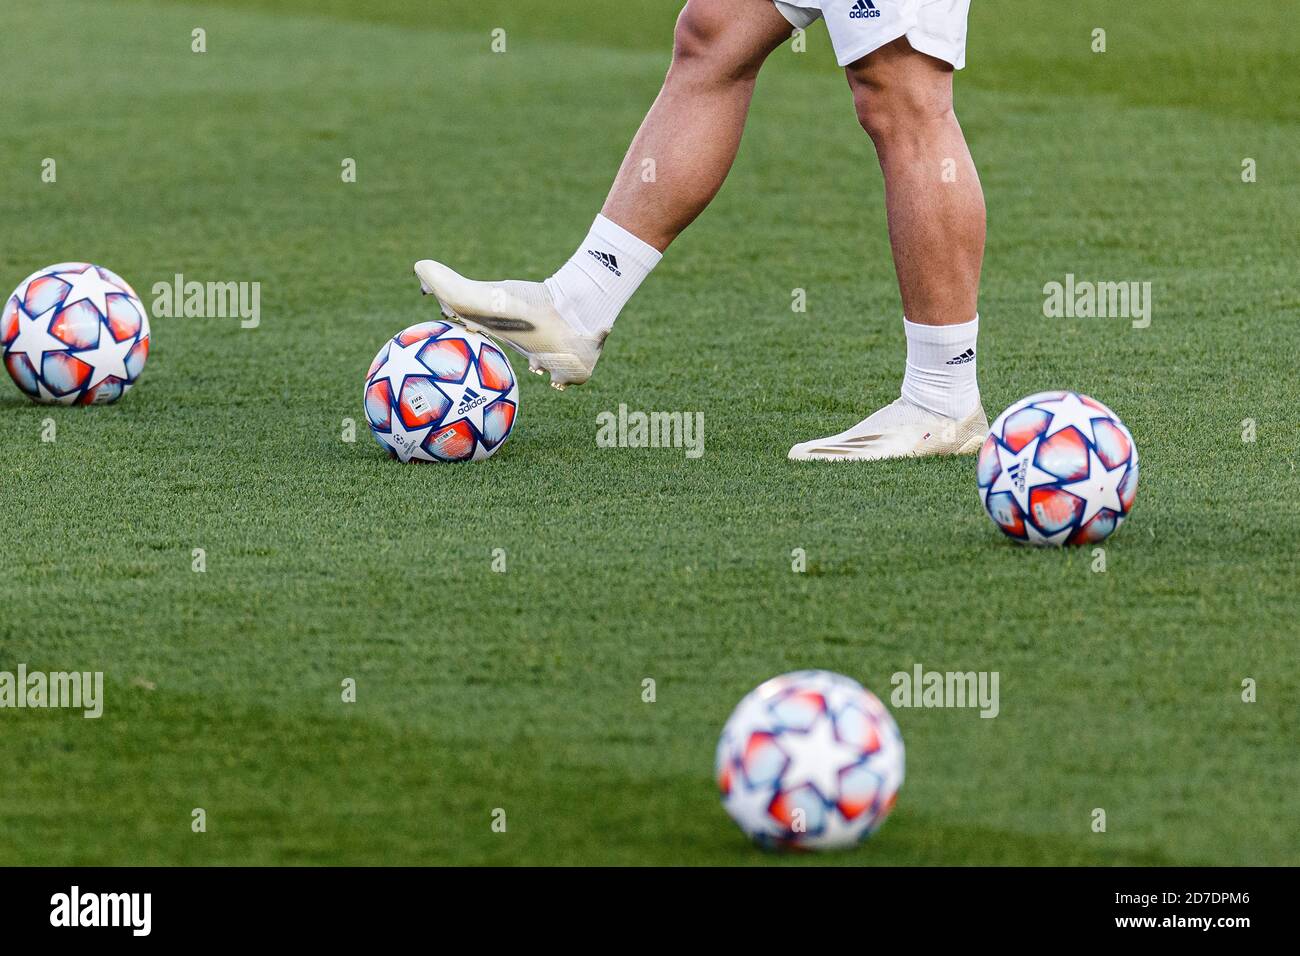 Madrid, Spain. 21st Oct, 2020. Adidas UCL Finale 20 Pro Ball during the  UEFA Champions League group stage match between Real Madrid and Shakhtar  Donetsk at Estadio Alfredo Di Stefano. (Photo by